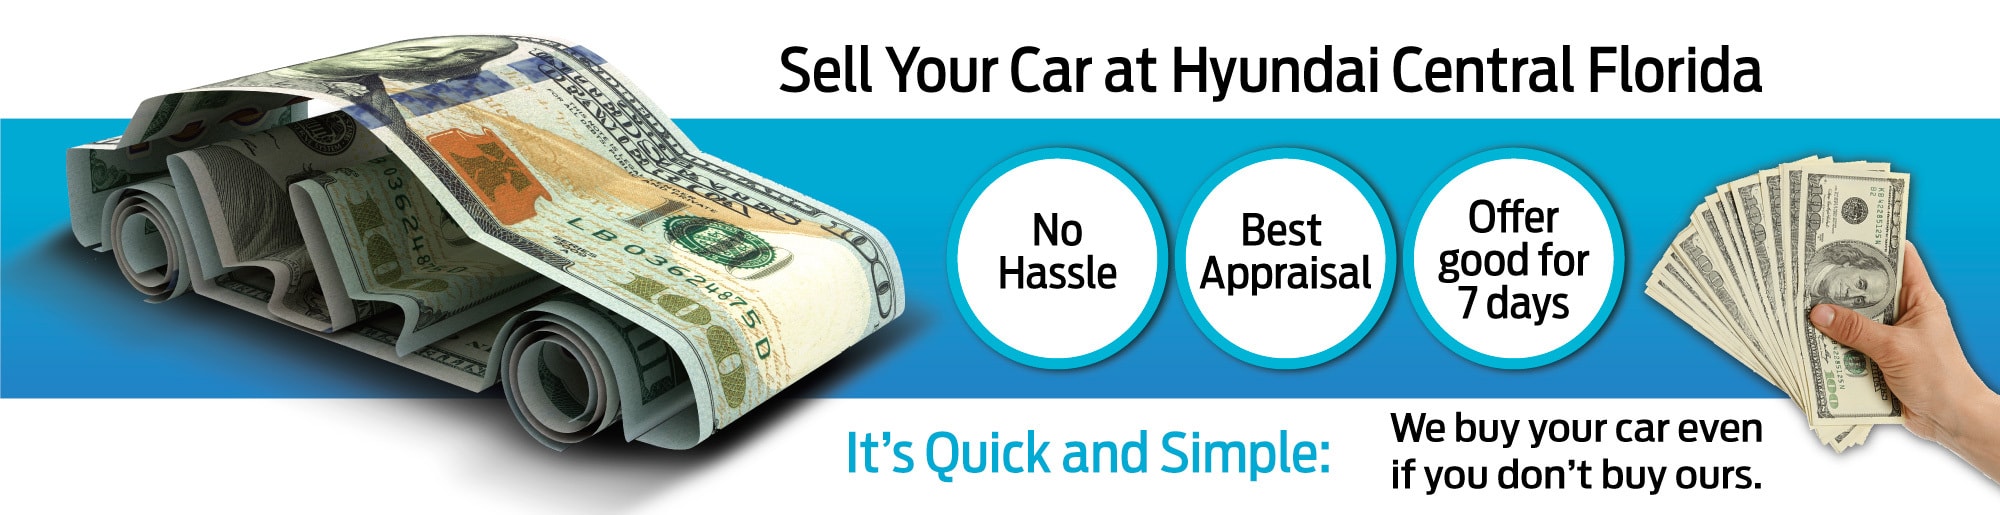 Sell Us Your Car for Cash - Hyundai of Central Florida